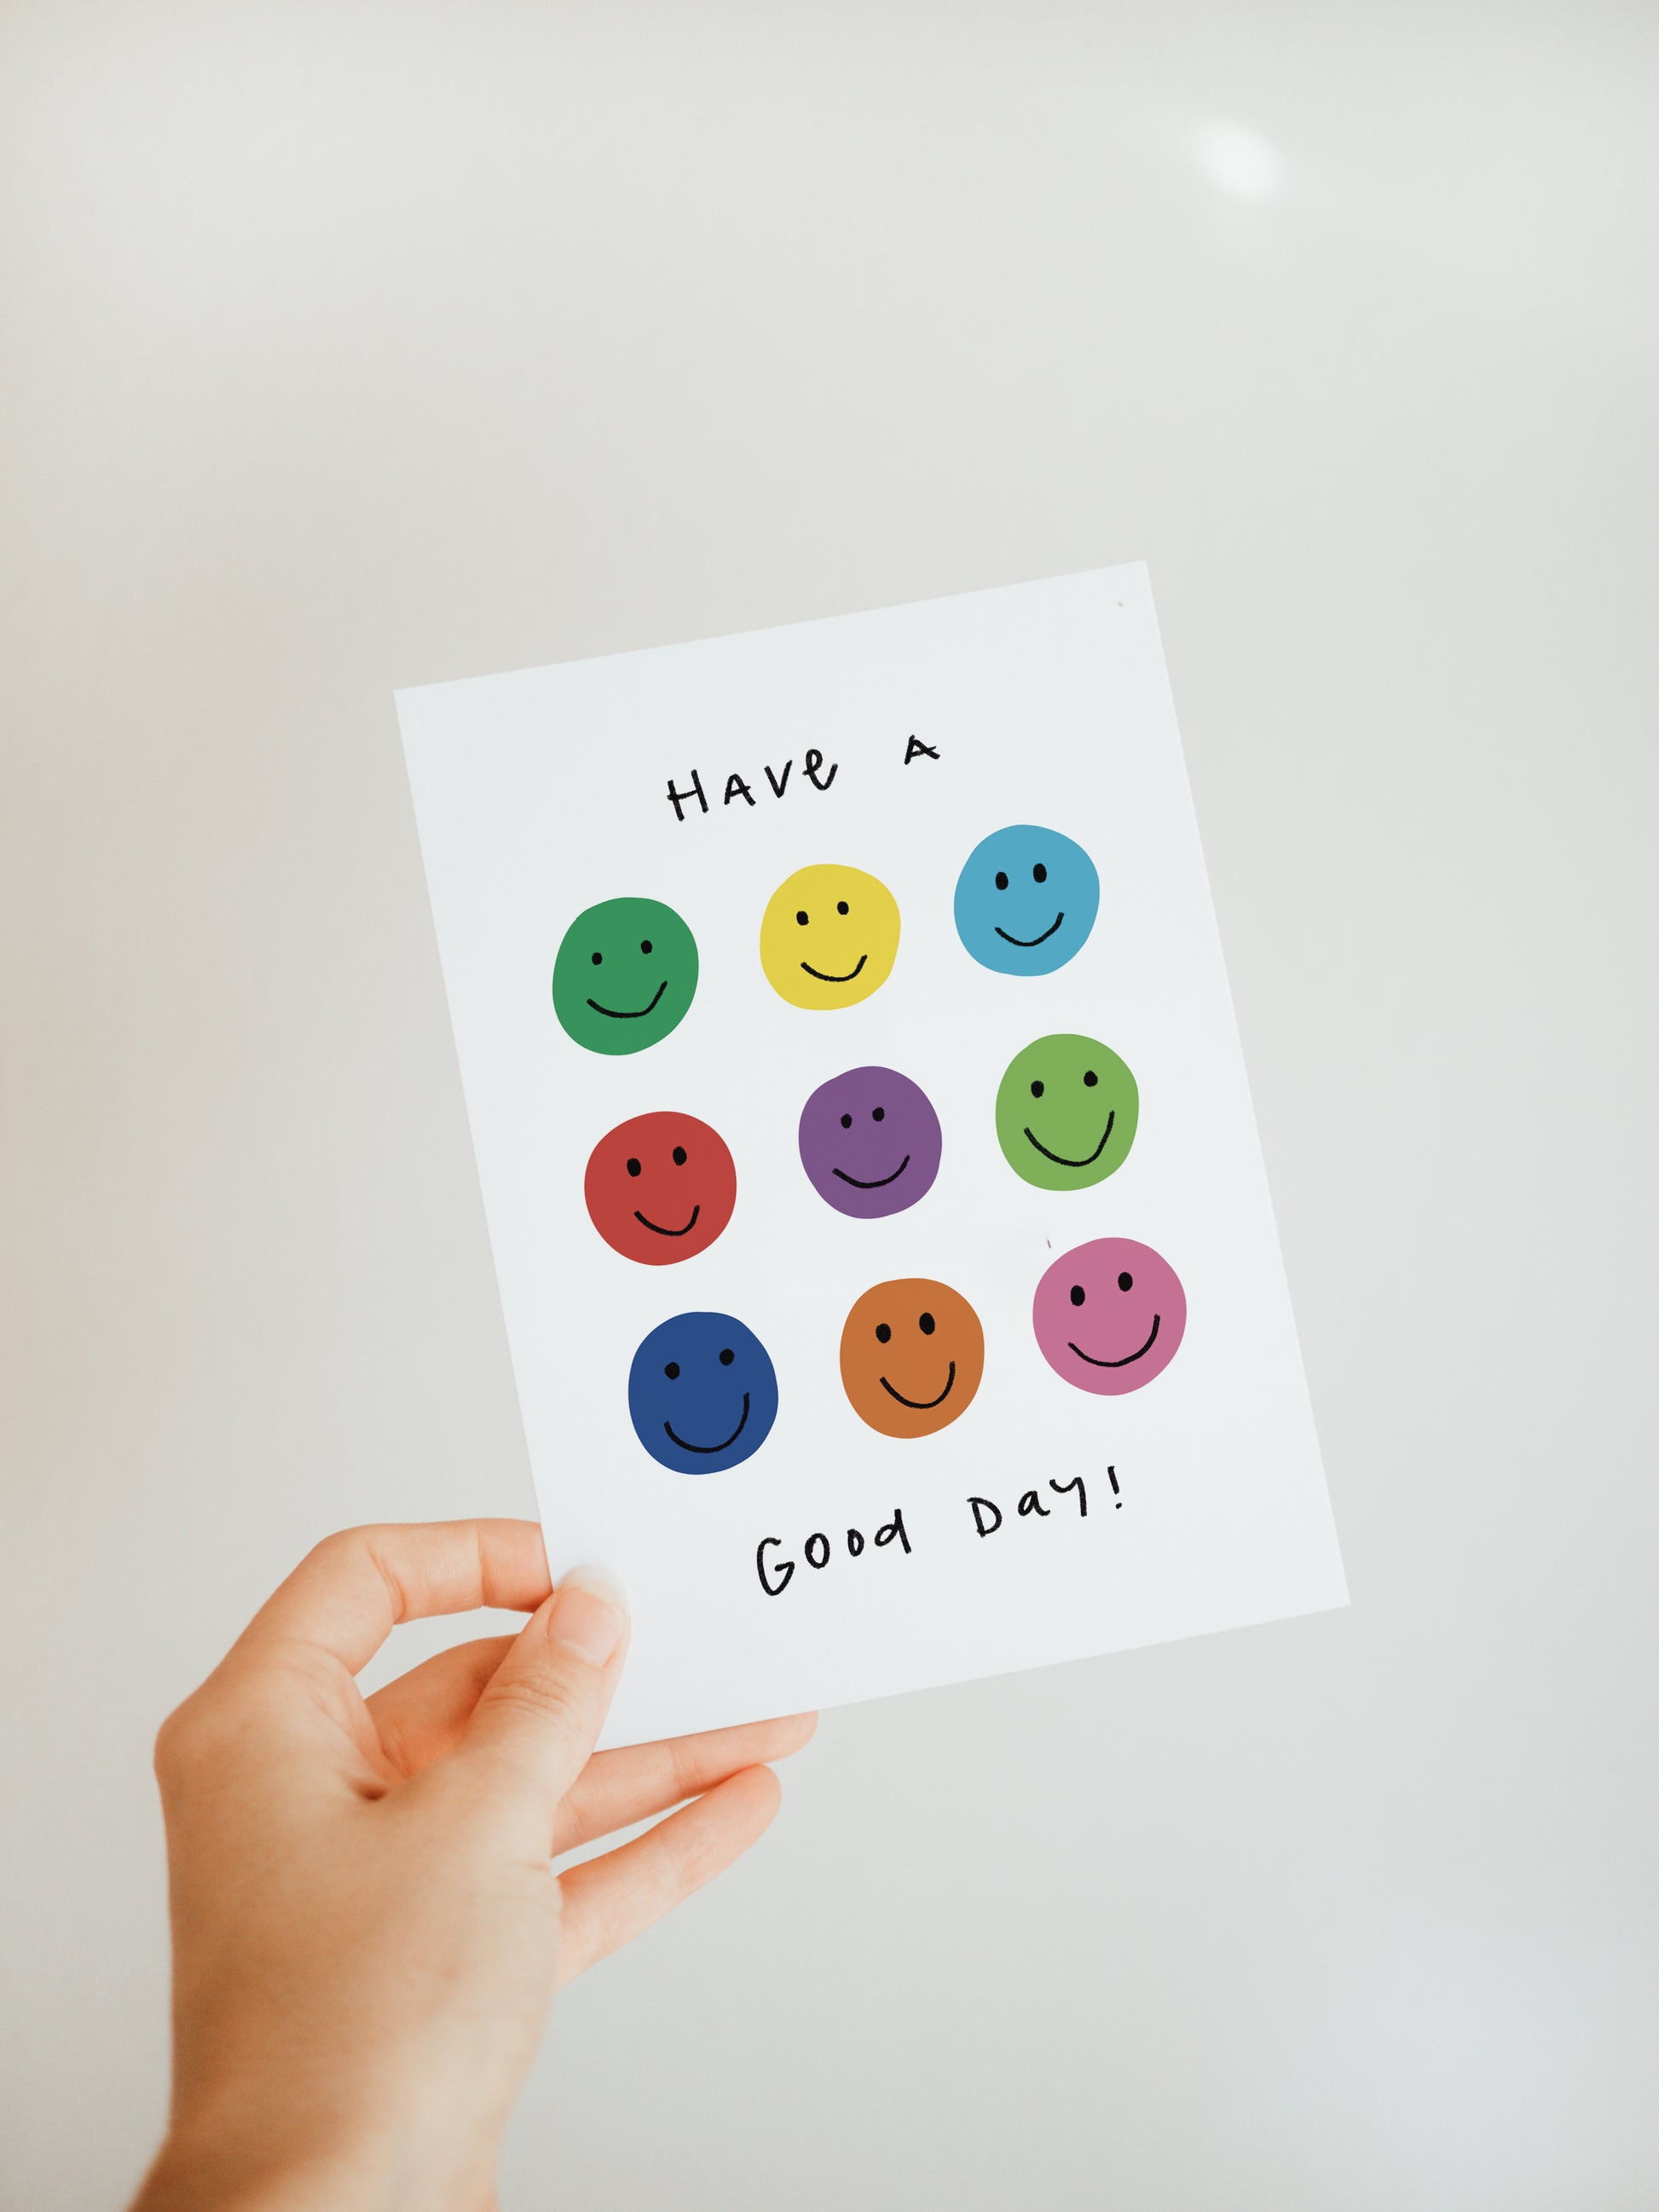 hand holding a white greeting card that has smiley faces in rainbow colors and says "Have a good day"